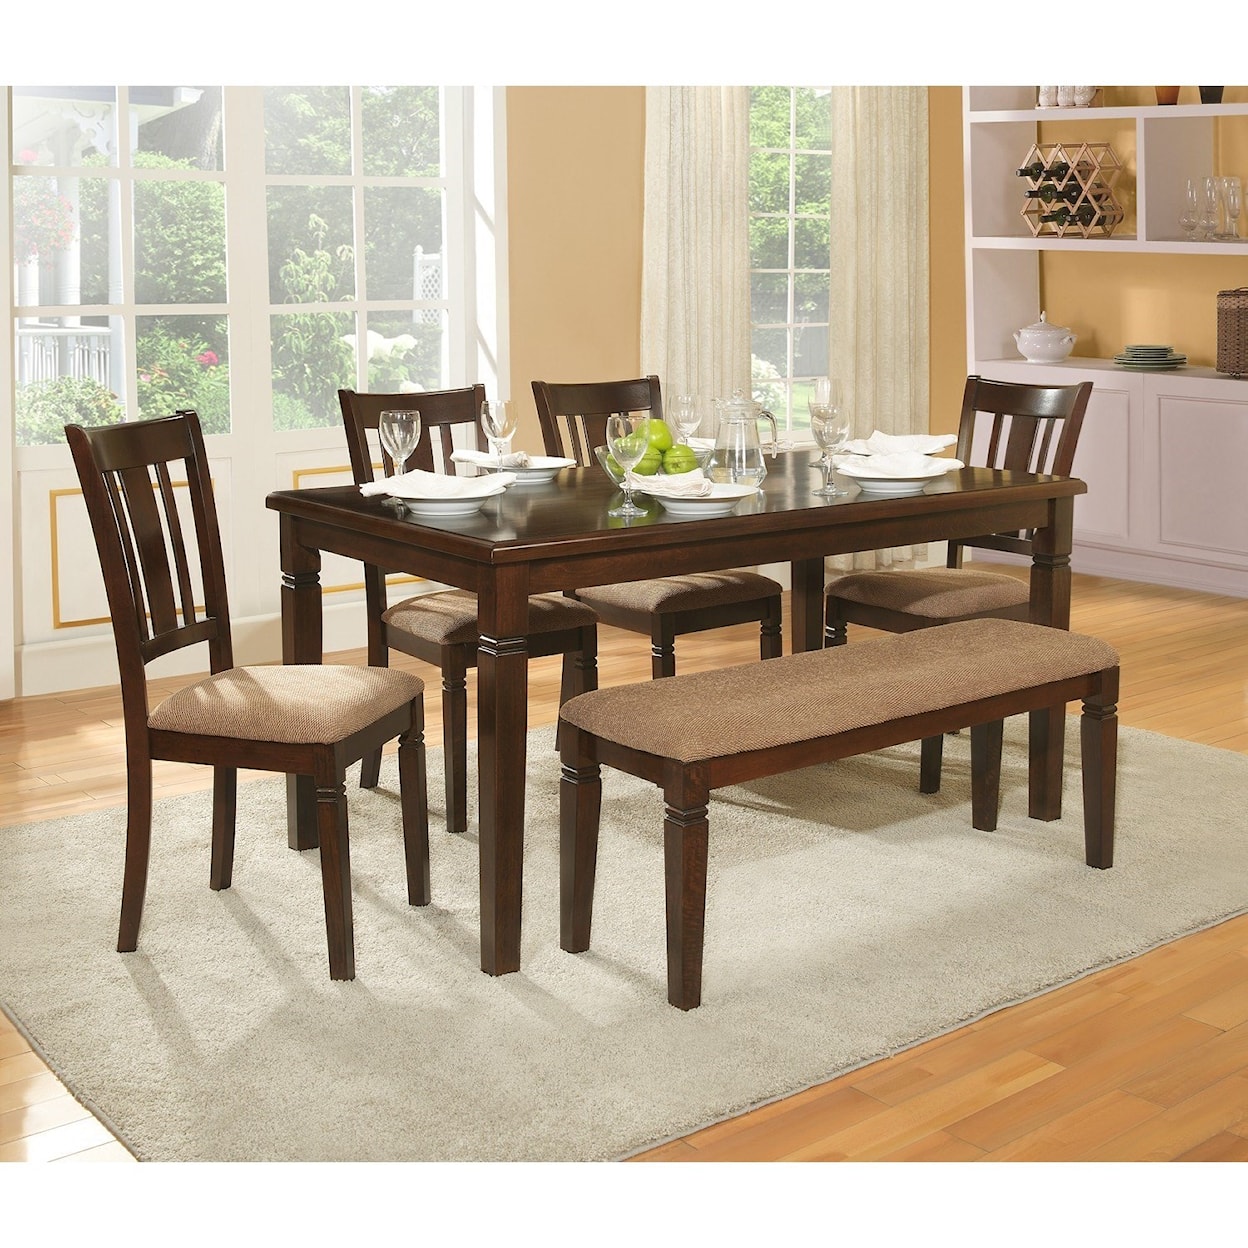 Homelegance Devlin Table and Chair Set with Bench